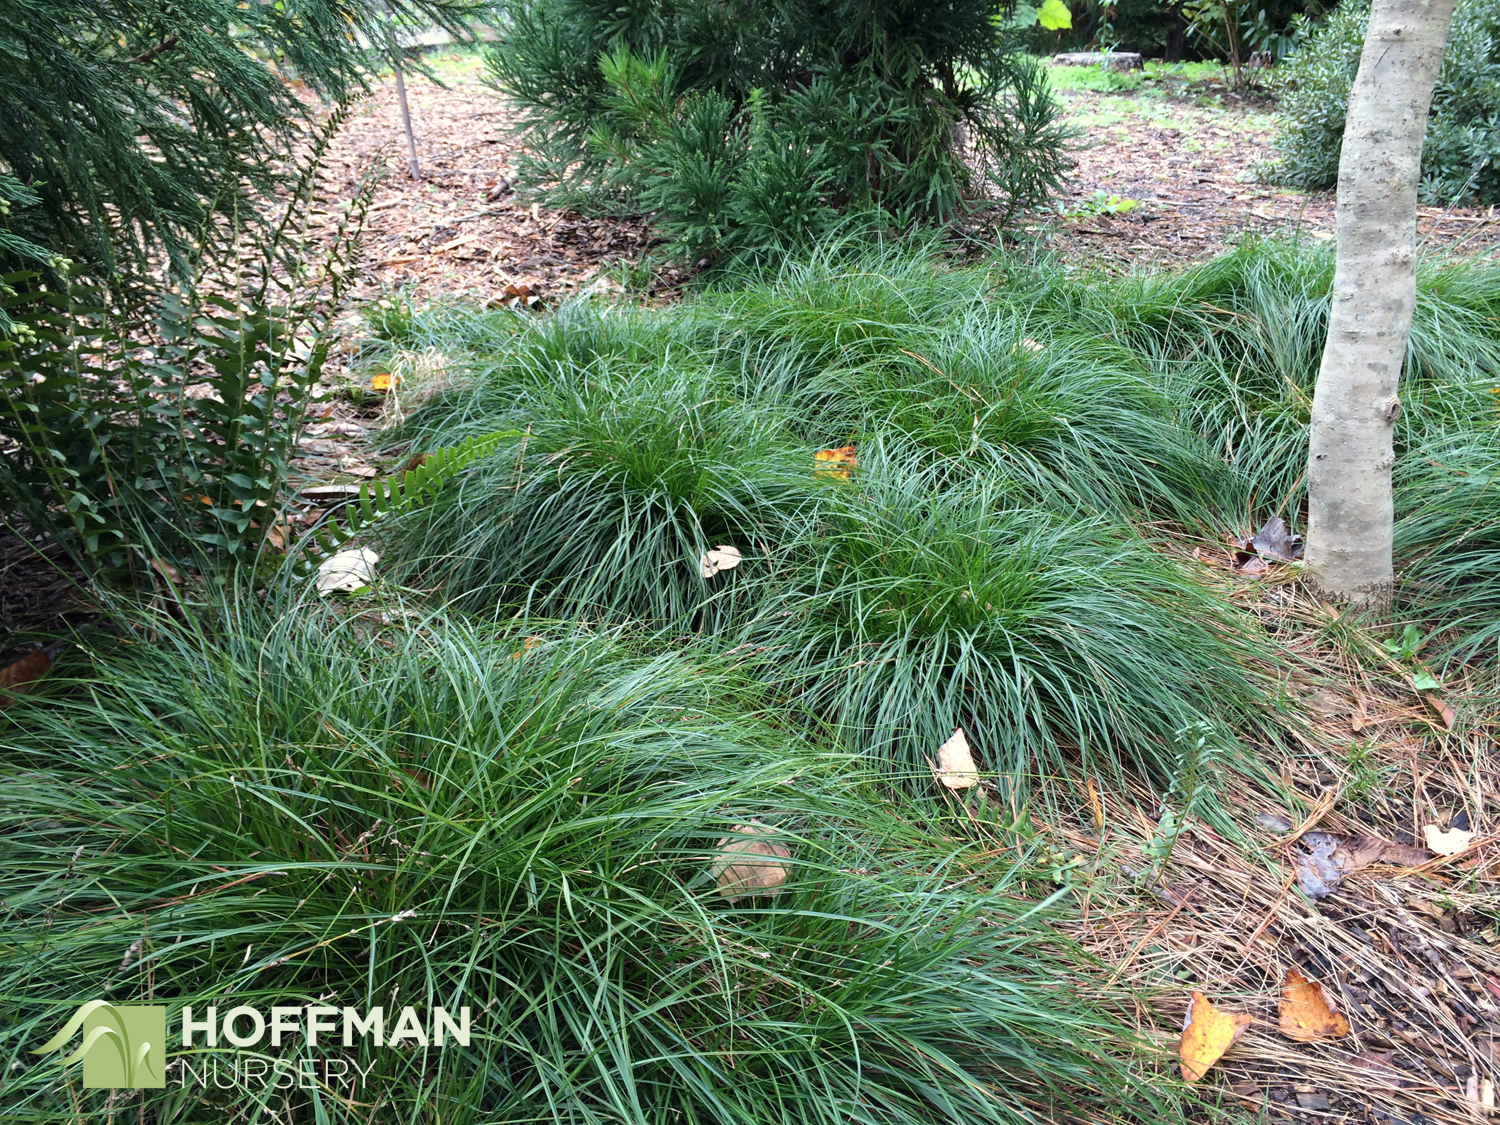 In early November, Carex divulsa continues to provide coverage and a beautiful green background. As a cool season grower, it gets a flush of growth as temperature drop in early Fall.